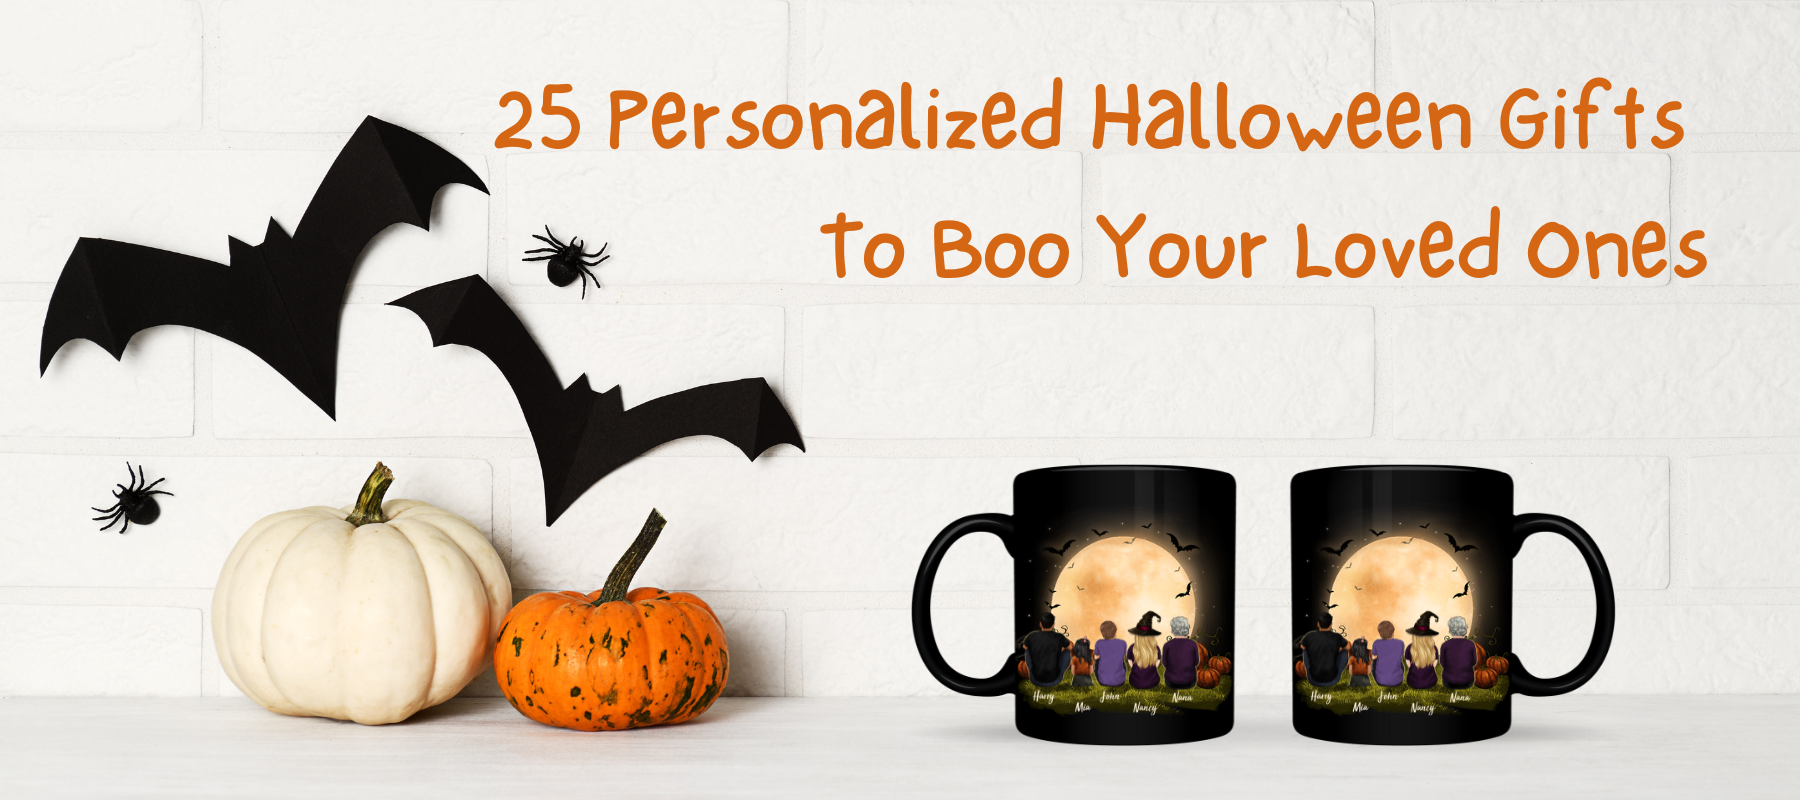 25 Personalized Halloween Gifts To Boo your Loved Ones